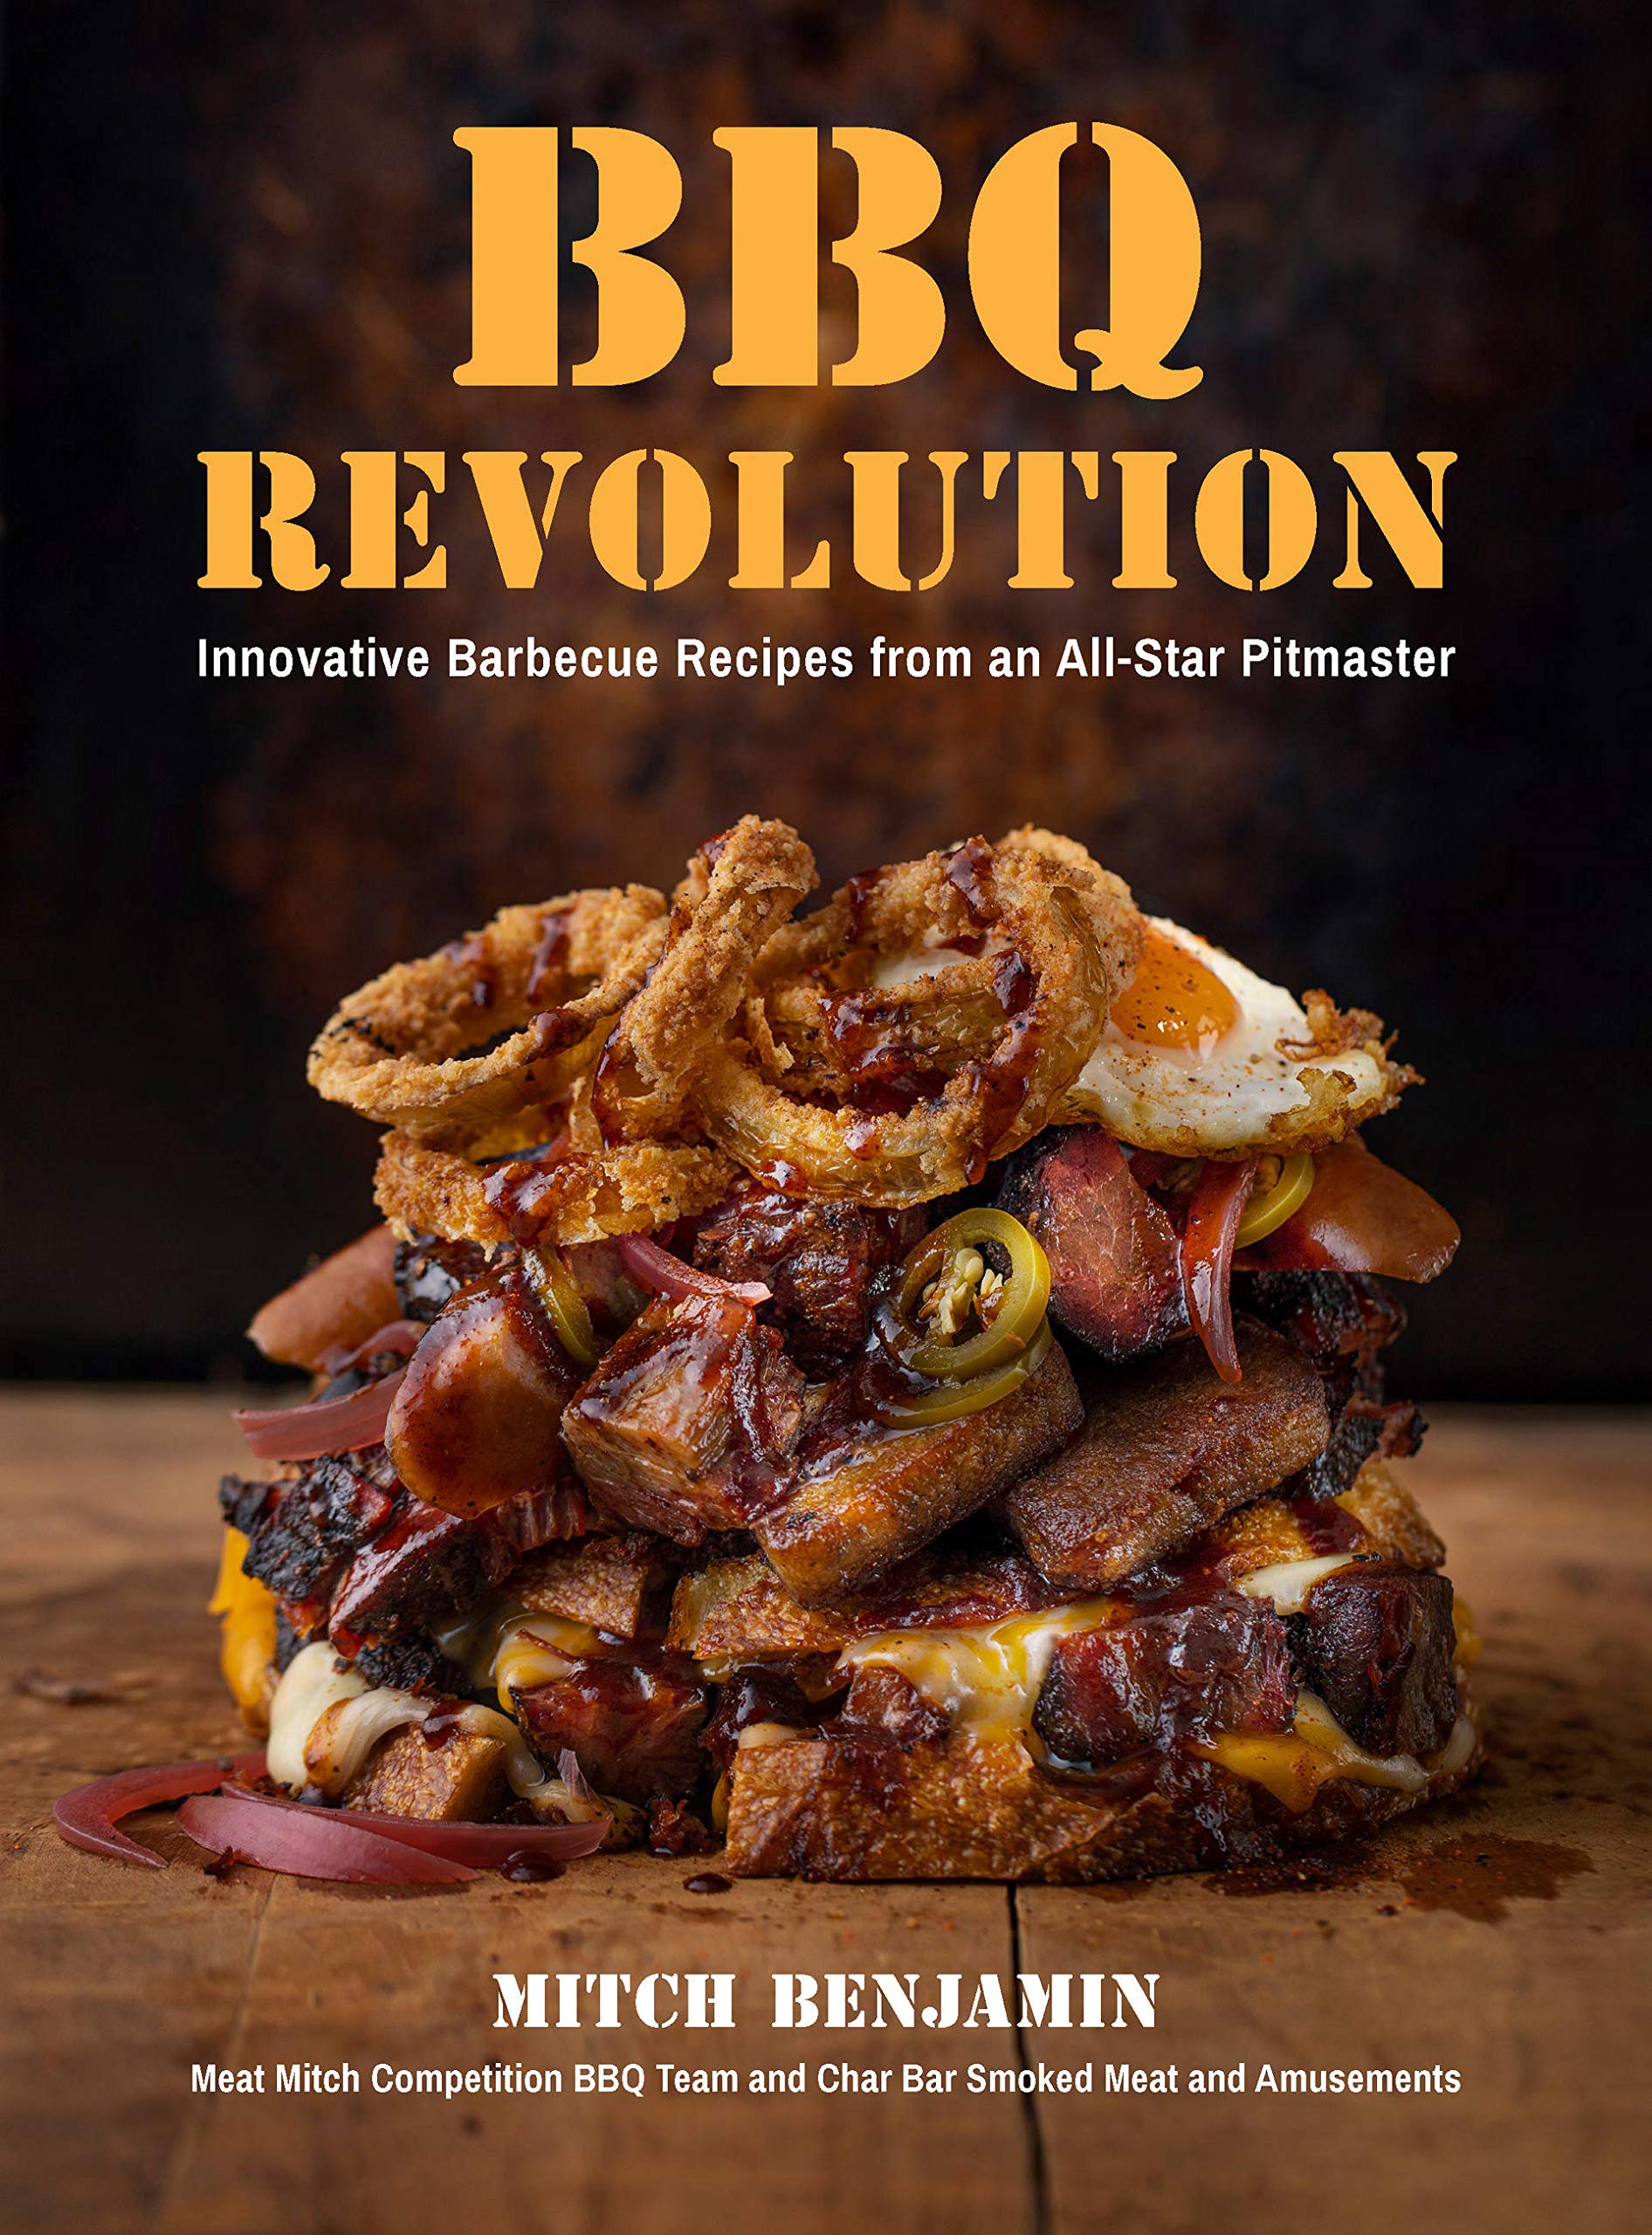 BBQ Revolution: Innovative Barbecue Recipes from an All-Star Pitmaster -  Cookbook - Meat Mitch